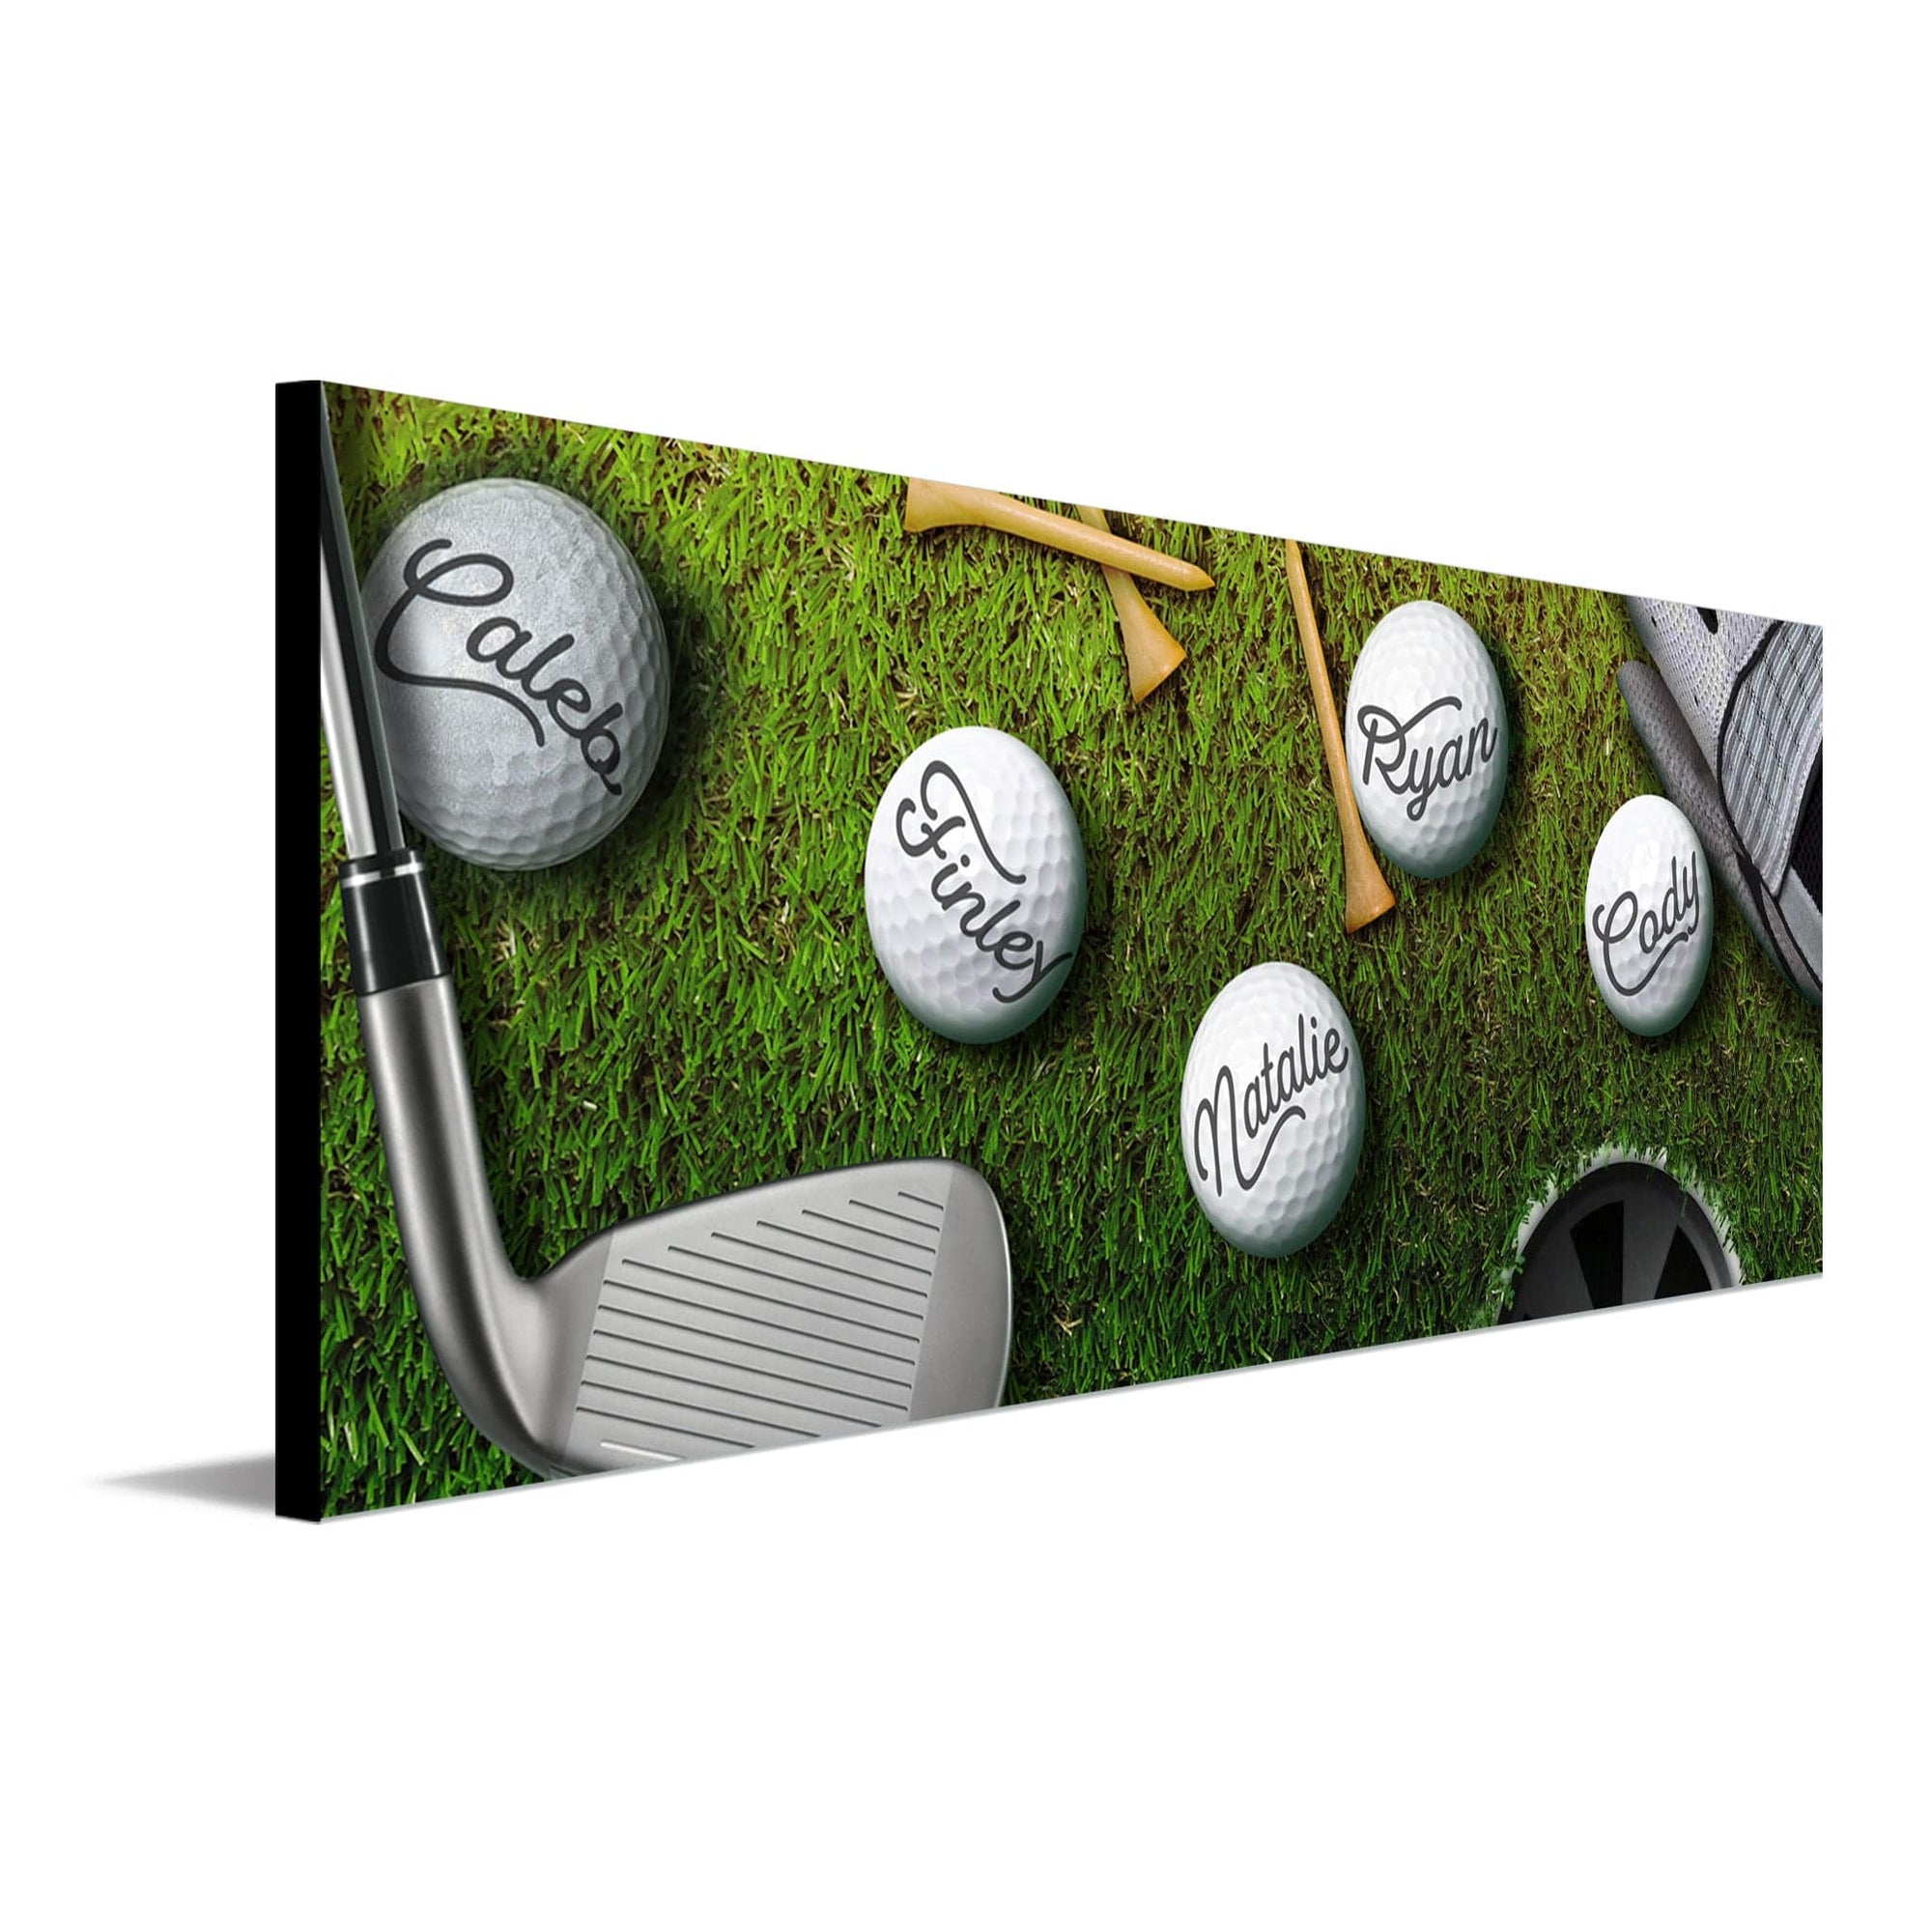 Personalized Golf Gift for Dad - Names of children on golf balls